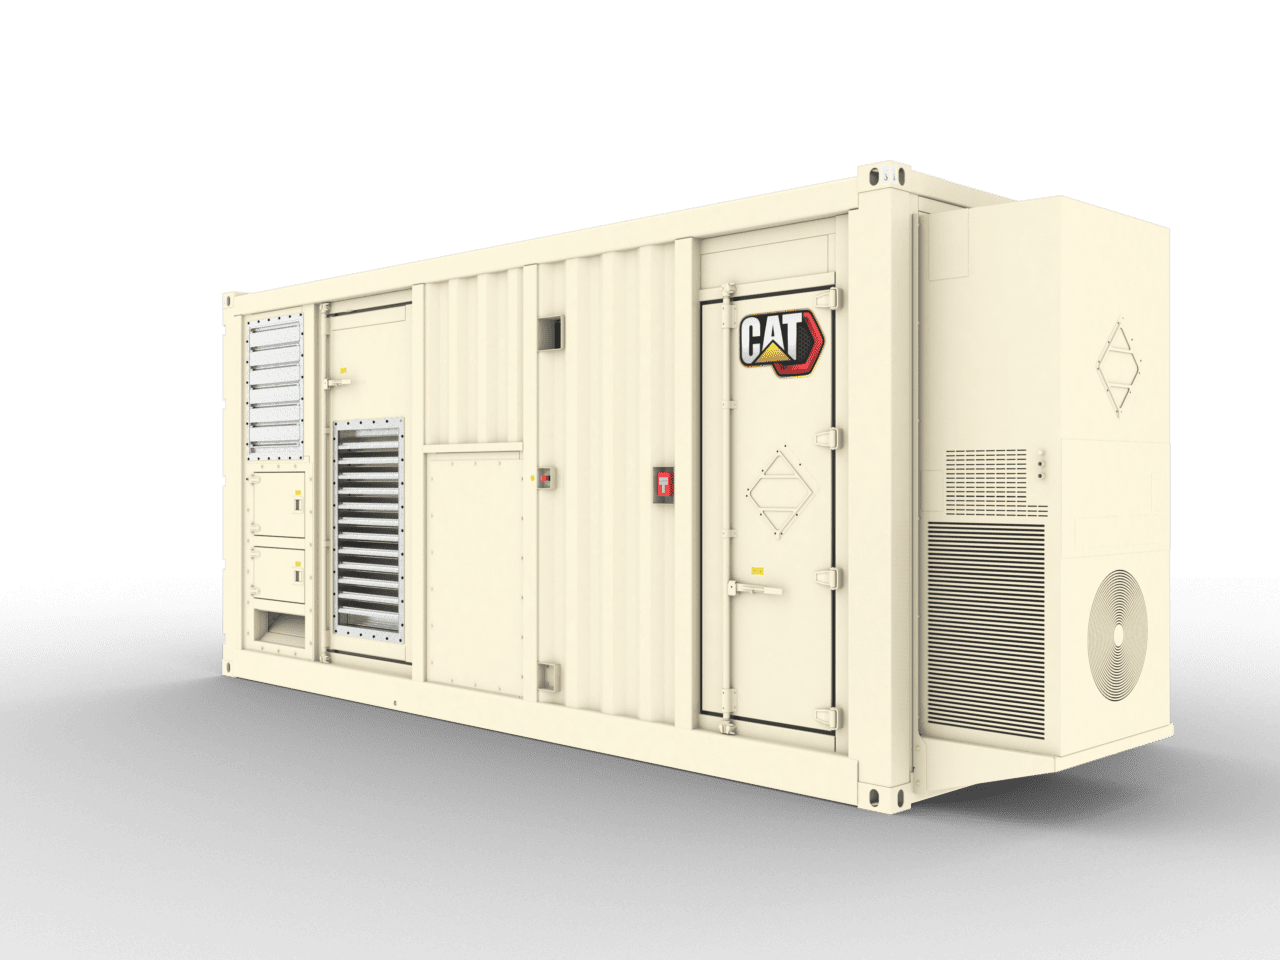 Hydrogen Fuel Cell Provides Backup Power for Microsoft Data Center